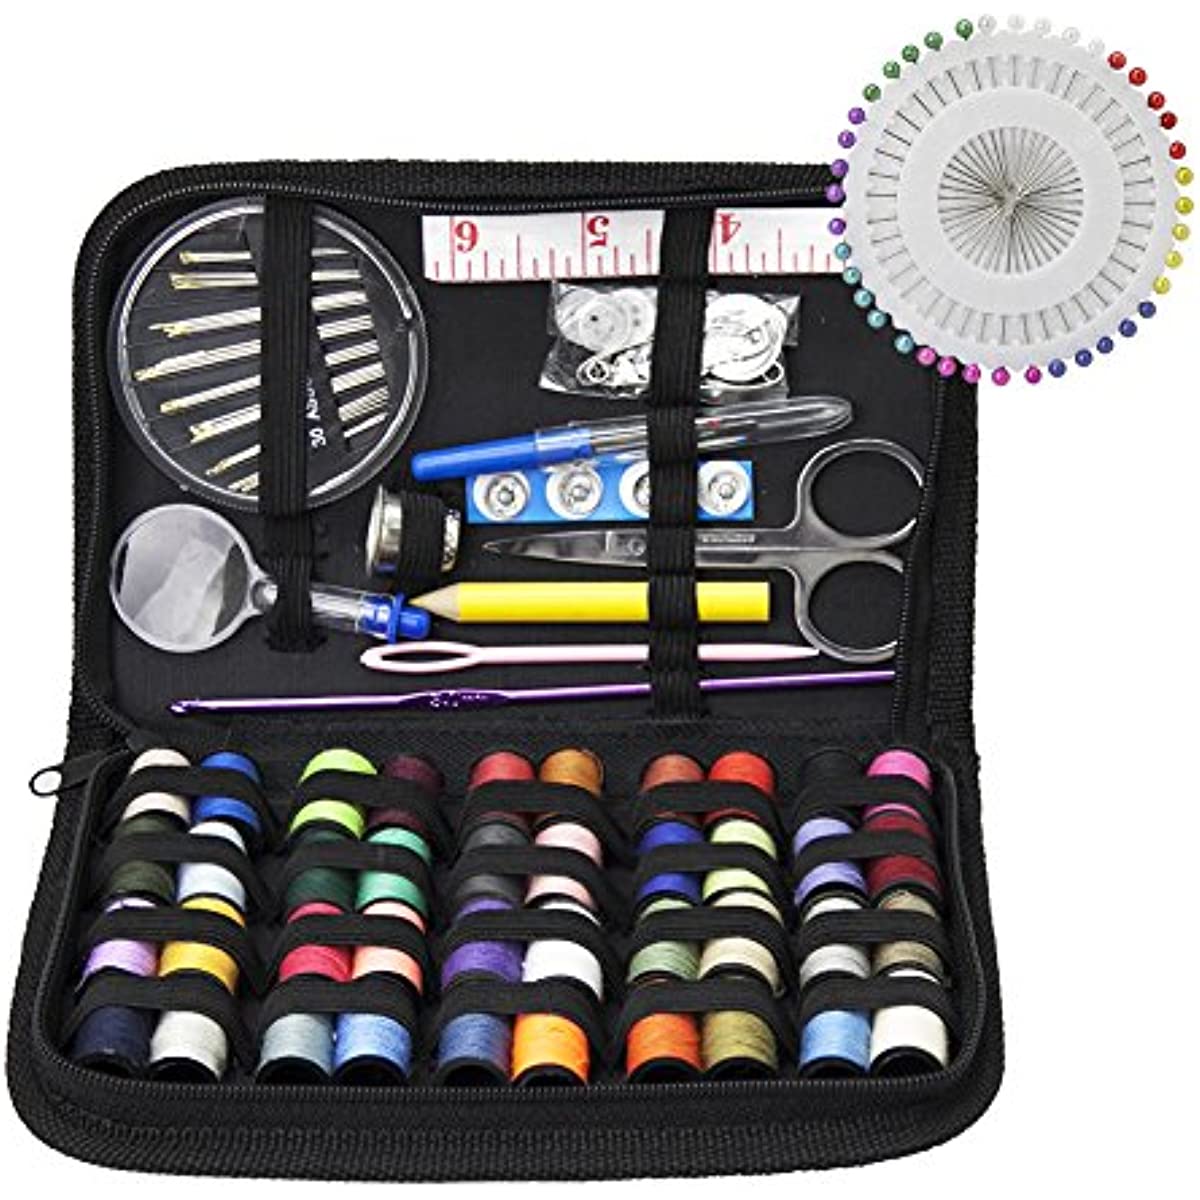 Sewing Kit, a Needle and Therad Kit for Sewing – Portable Basic